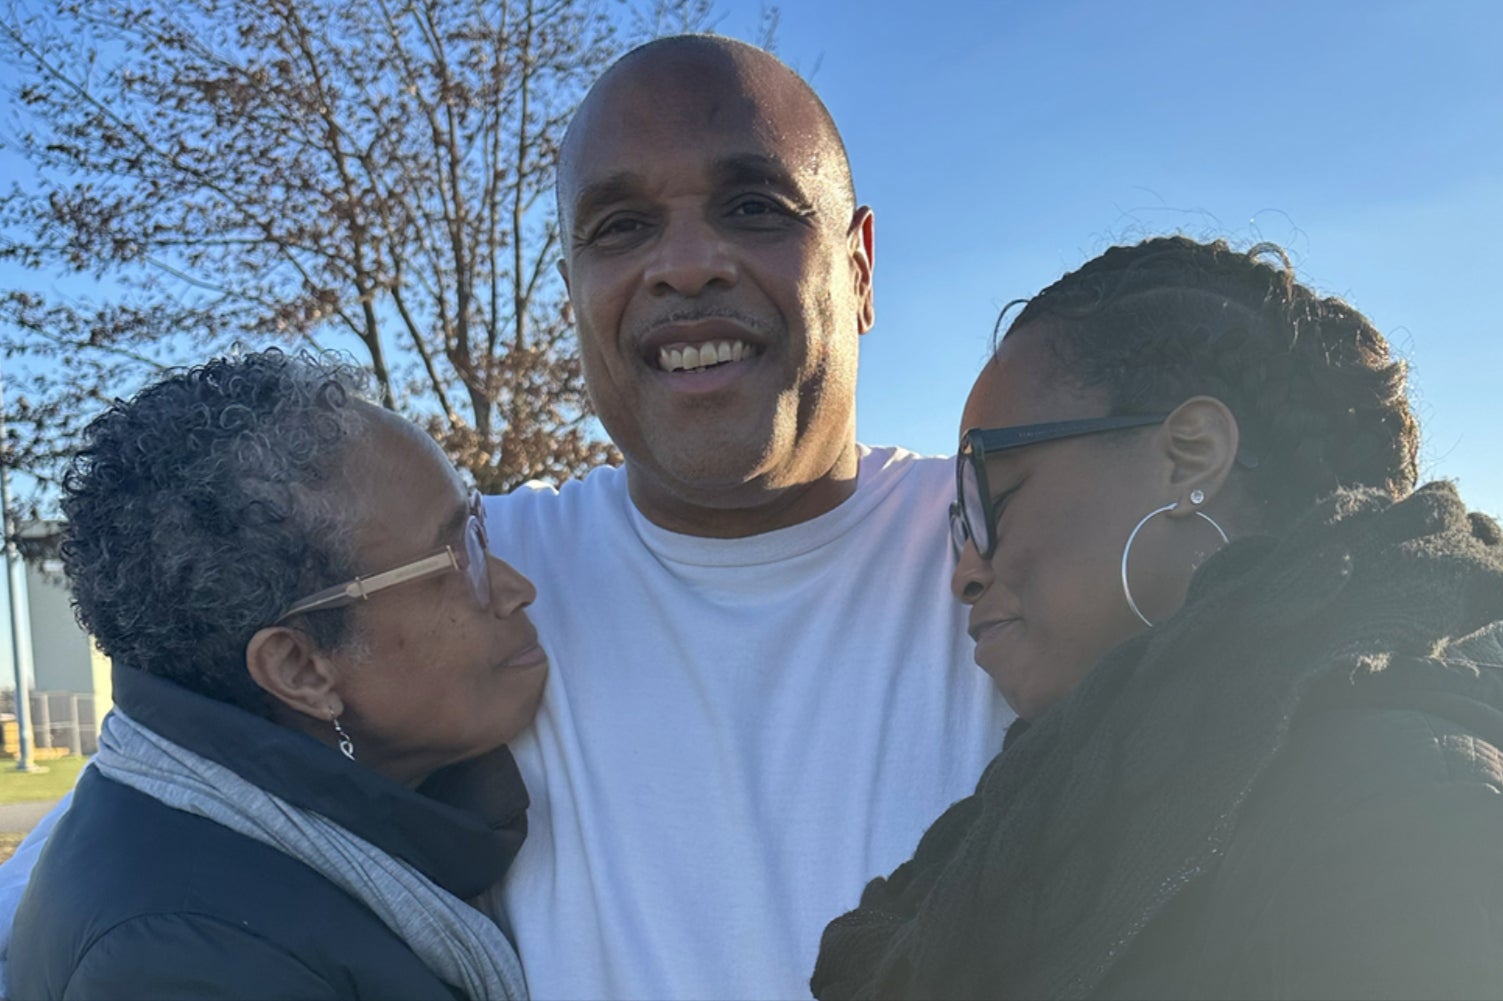 Man walks free from jail 35 years after wrongful murder conviction of 6-year-old boy